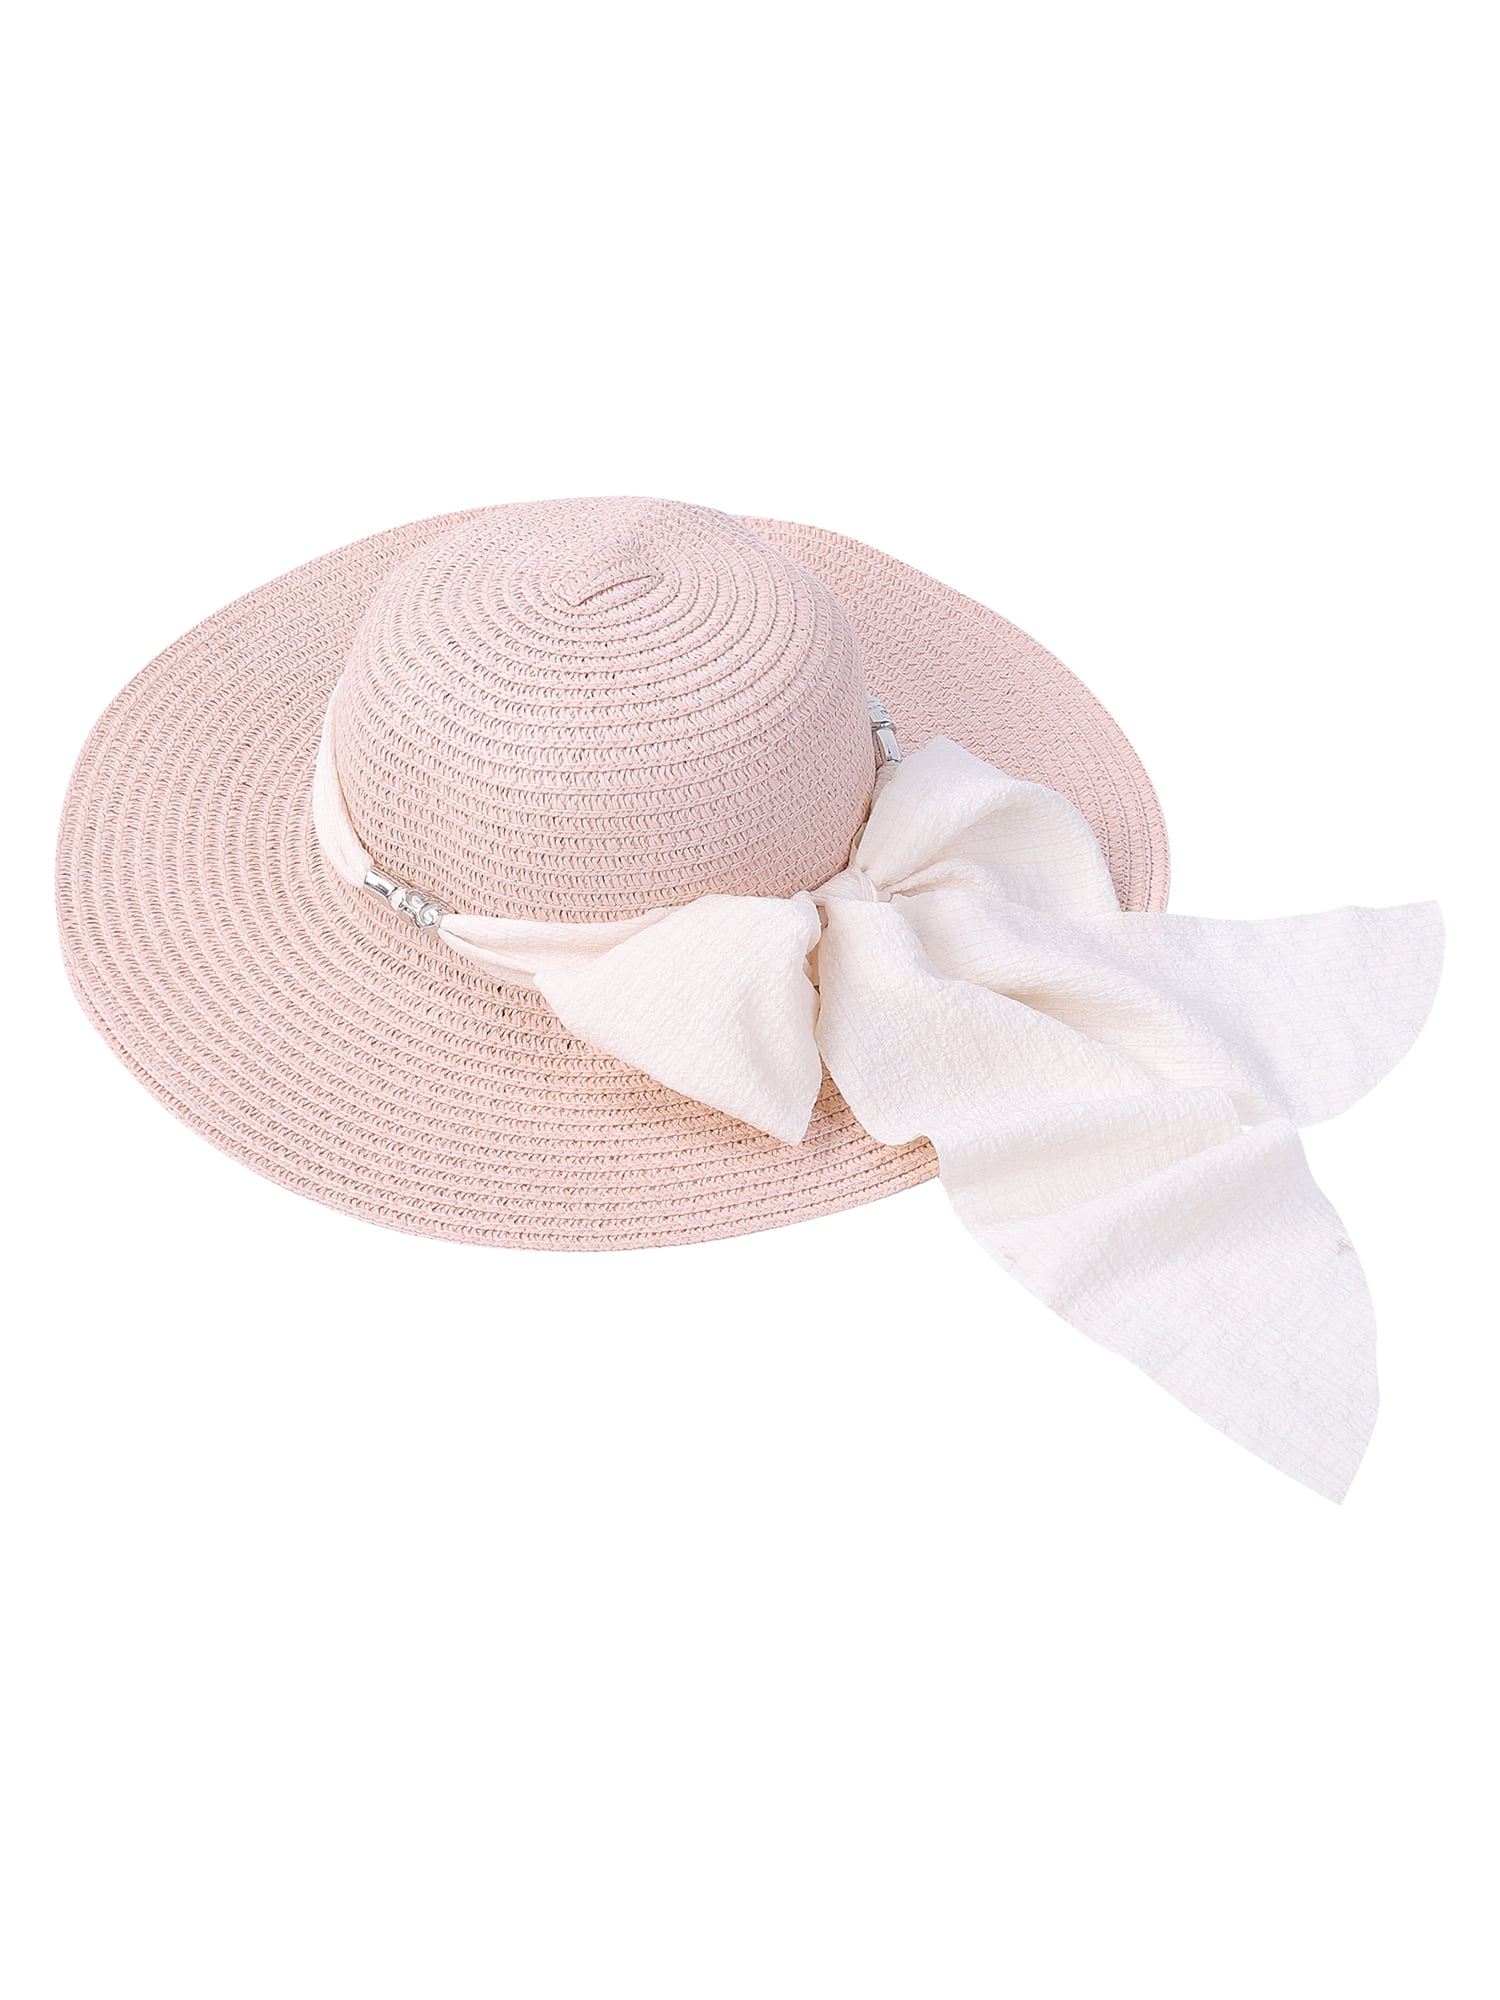 Toddler Kid Girls Summer Straw Hat with Bowknot Beach Foldable Visor Floppy Hats Wide Brim Sun Protection Hats 